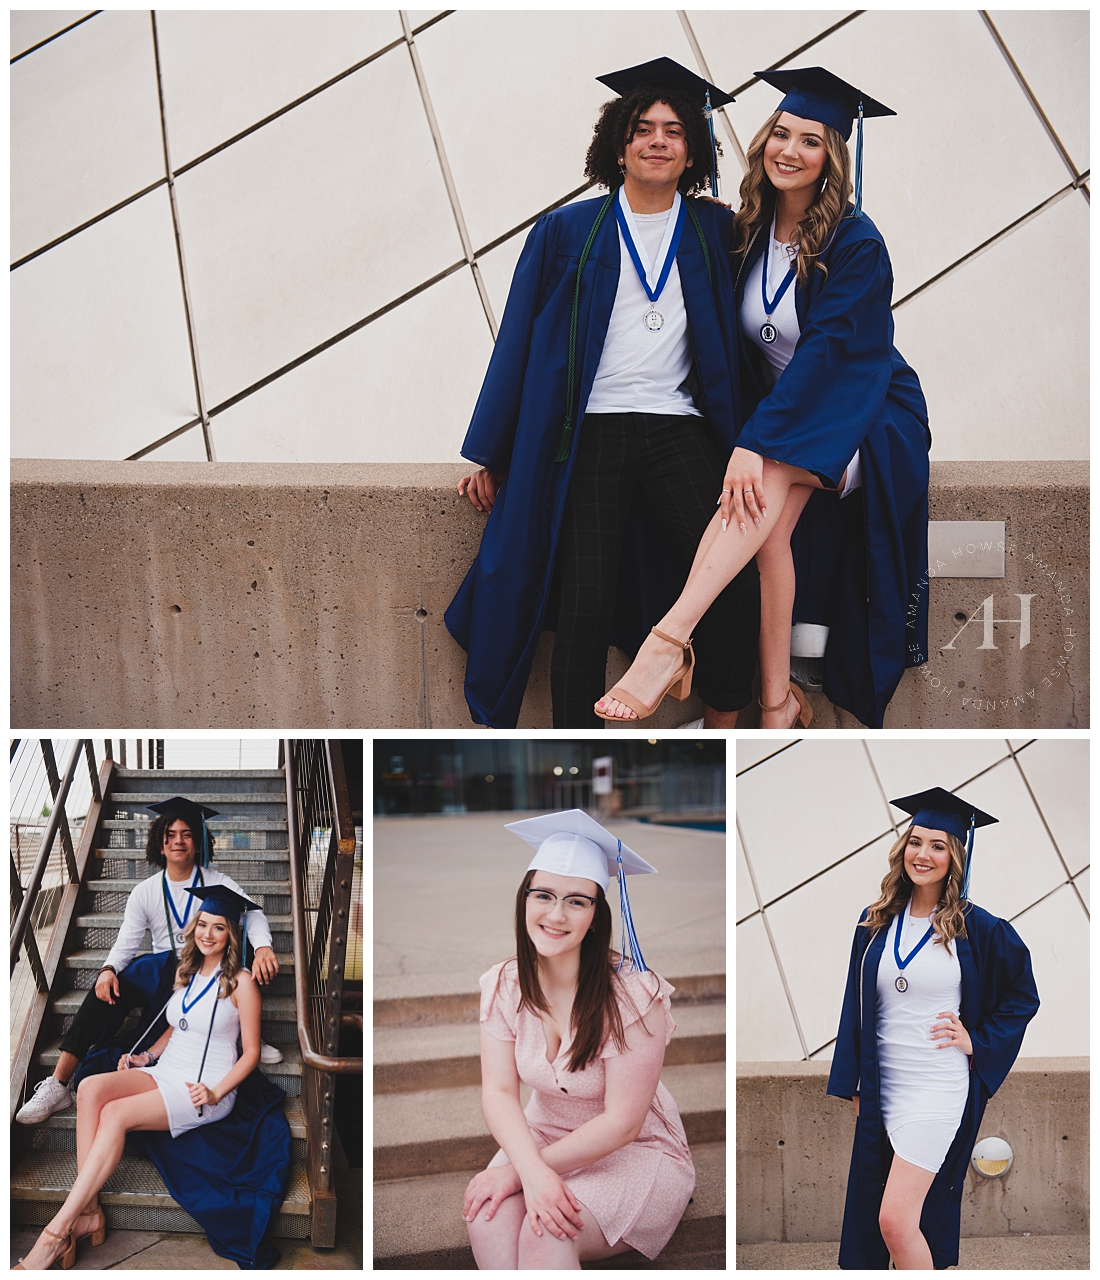 Tacoma Museum of Glass Senior Portraits | Modern Cap and Gown Portraits in Tacoma, How to Celebrate Graduation, Cute BFF Graduation Portraits | Photographed by the Best Tacoma Senior Photographer Amanda Howse